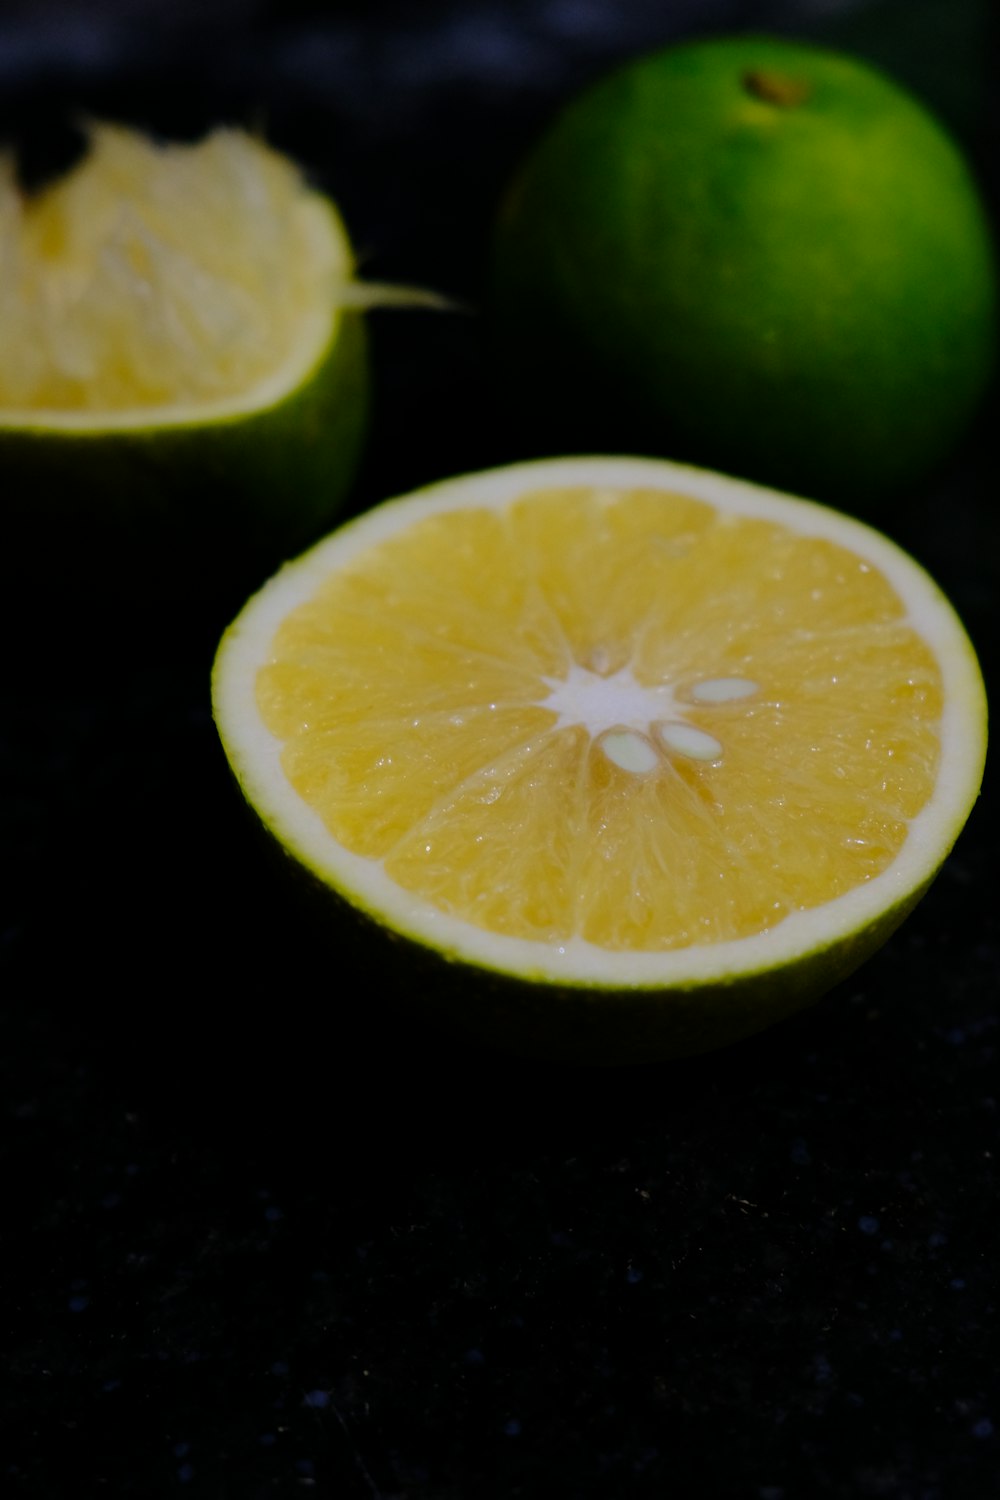 a close up of a lemon and a lime on a table